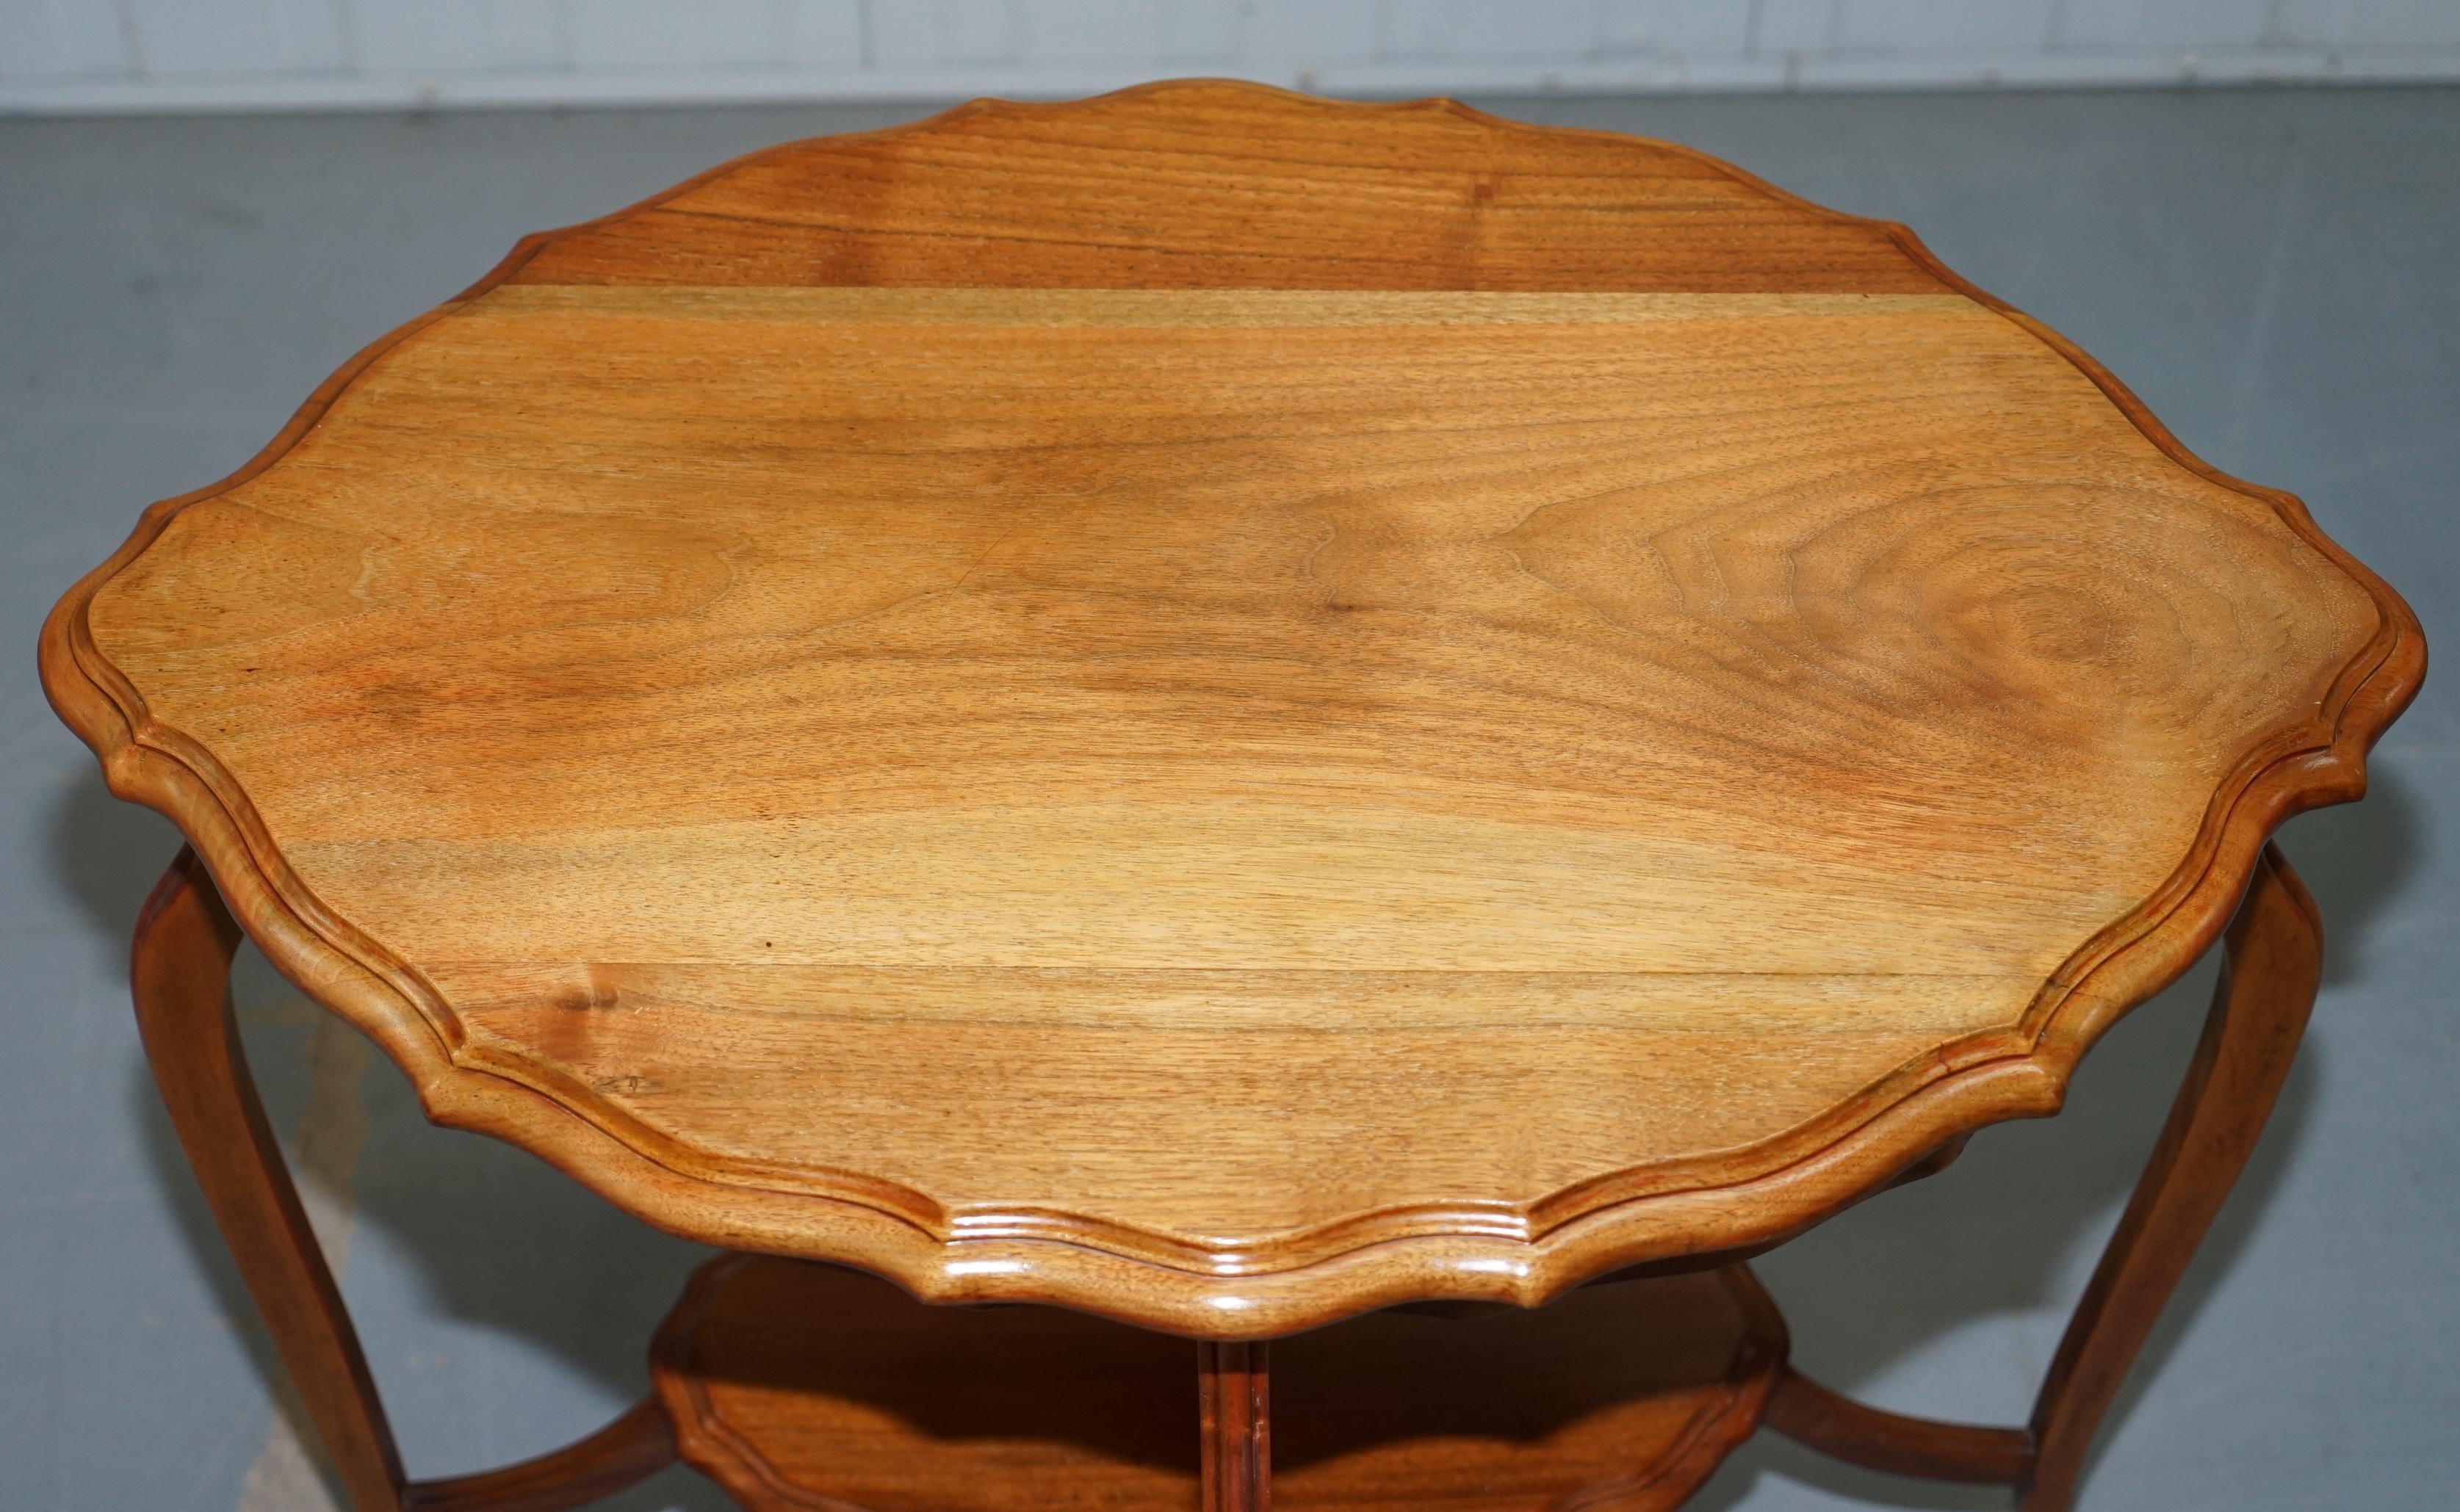 Hand-Carved Lovely Decorative Satinwood Occasional Centre Table Scalloped Edge Ornate Legs For Sale